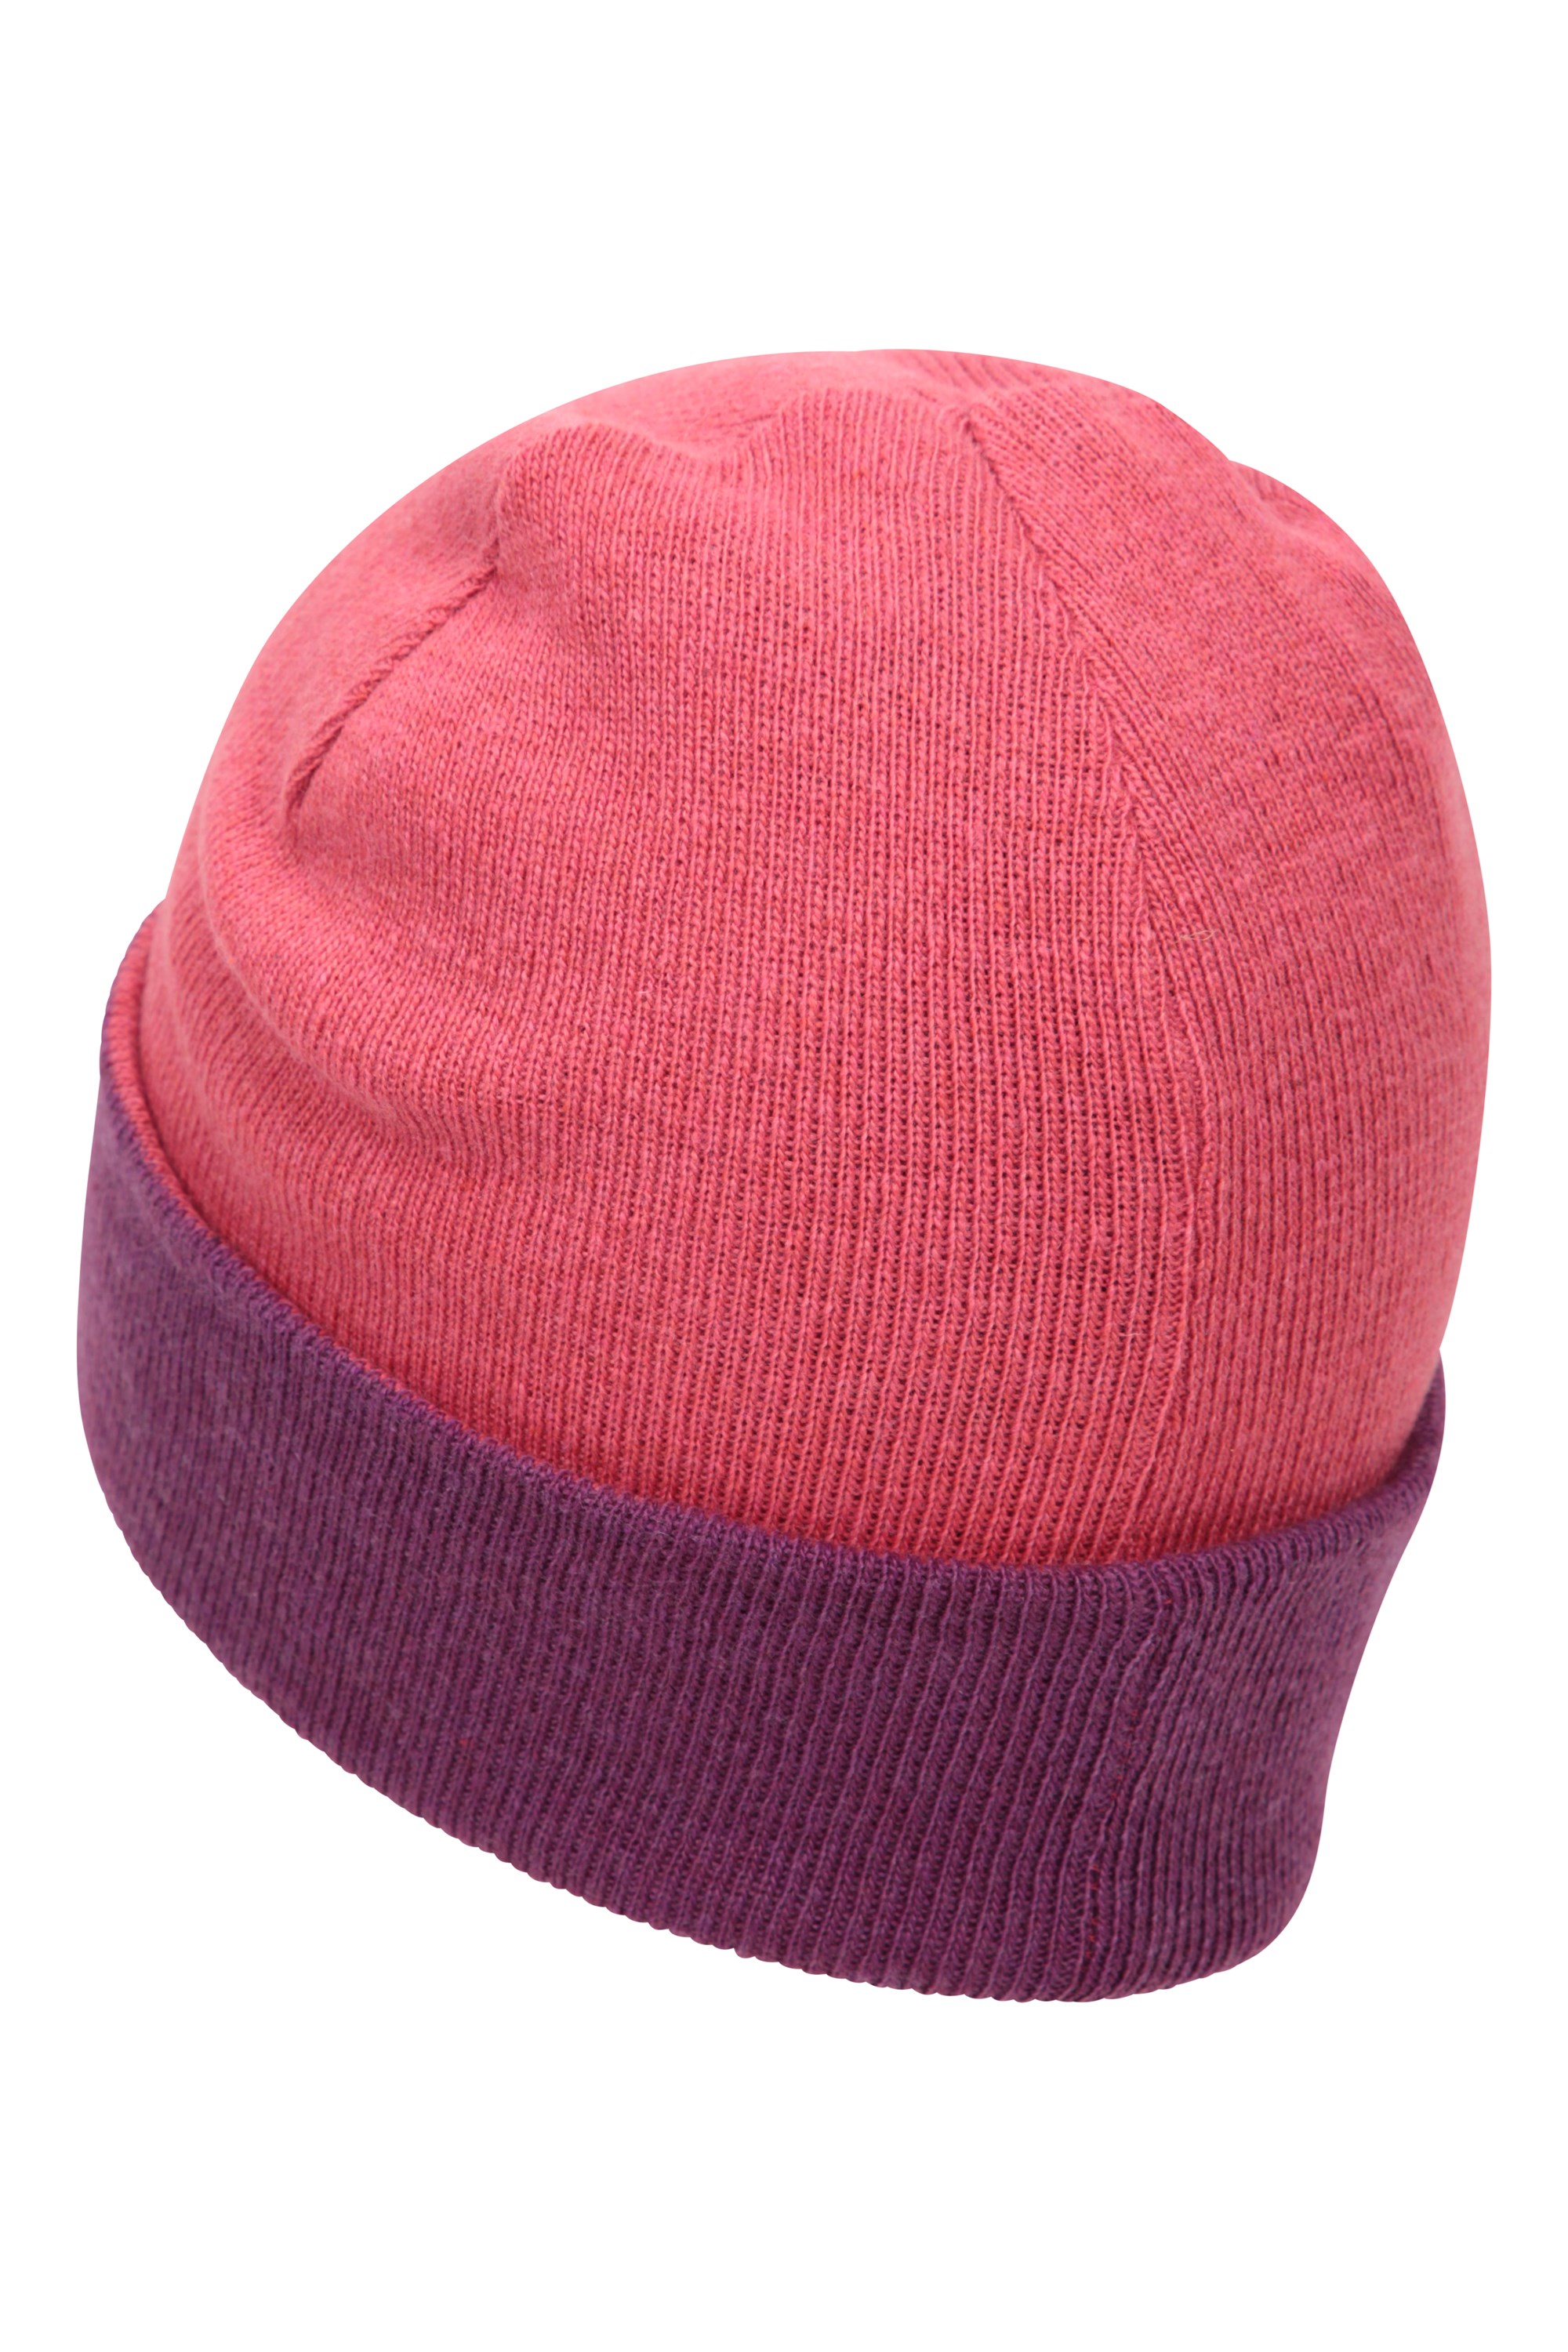 Details about   Mountain Warehouse Womens Winter Hats with Faux Fur and Fleece Lined for Warmth 